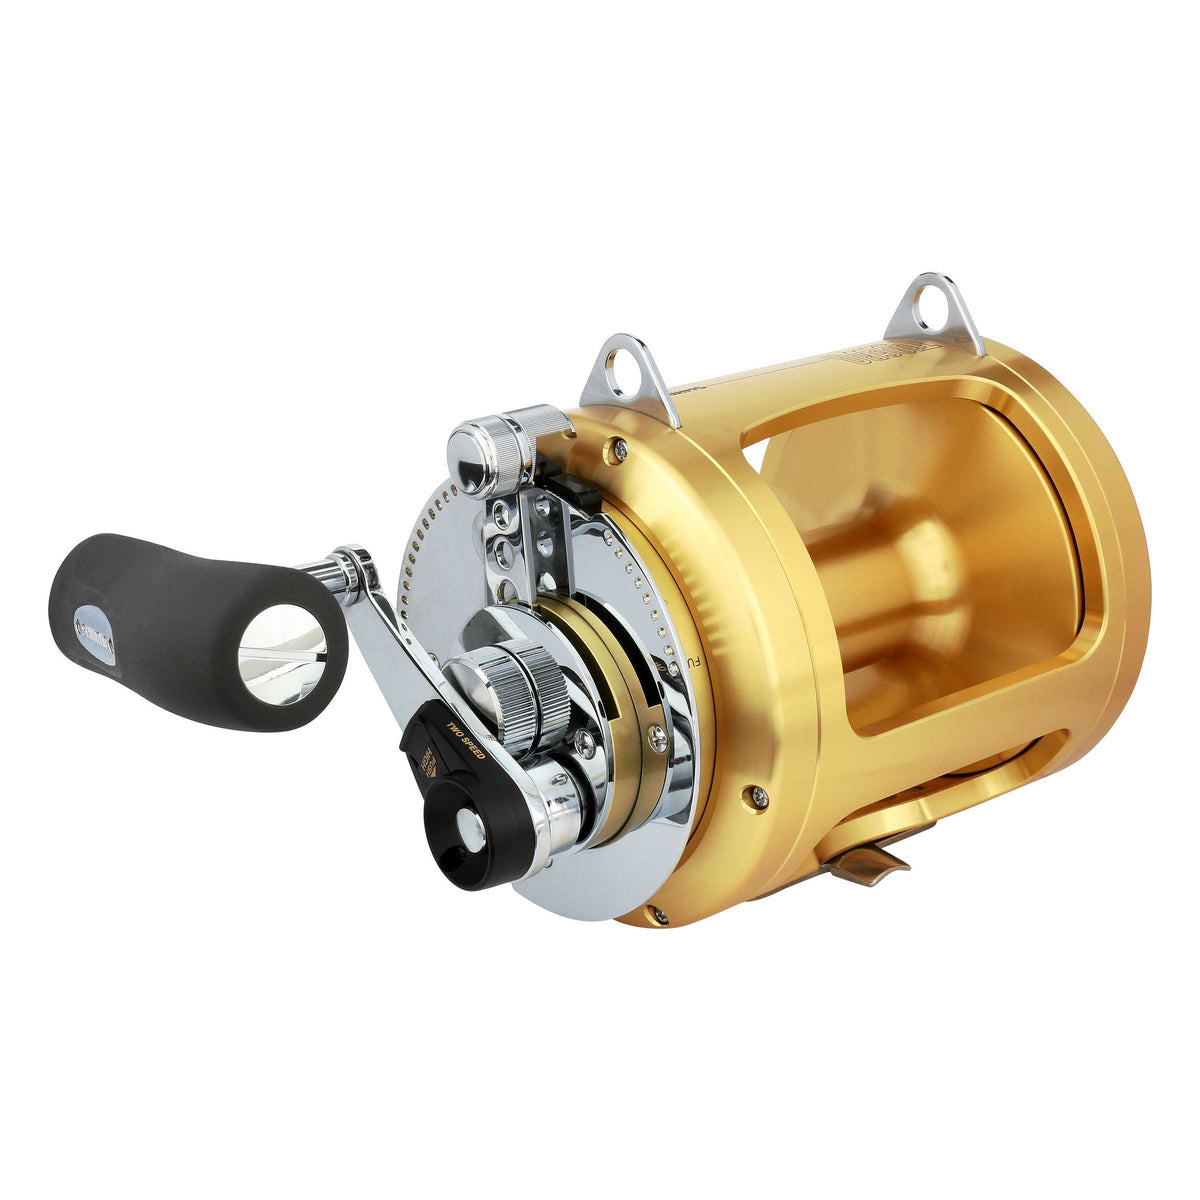 Excellent quality and Fashionable - Overhead Reels Shimano Tiagra